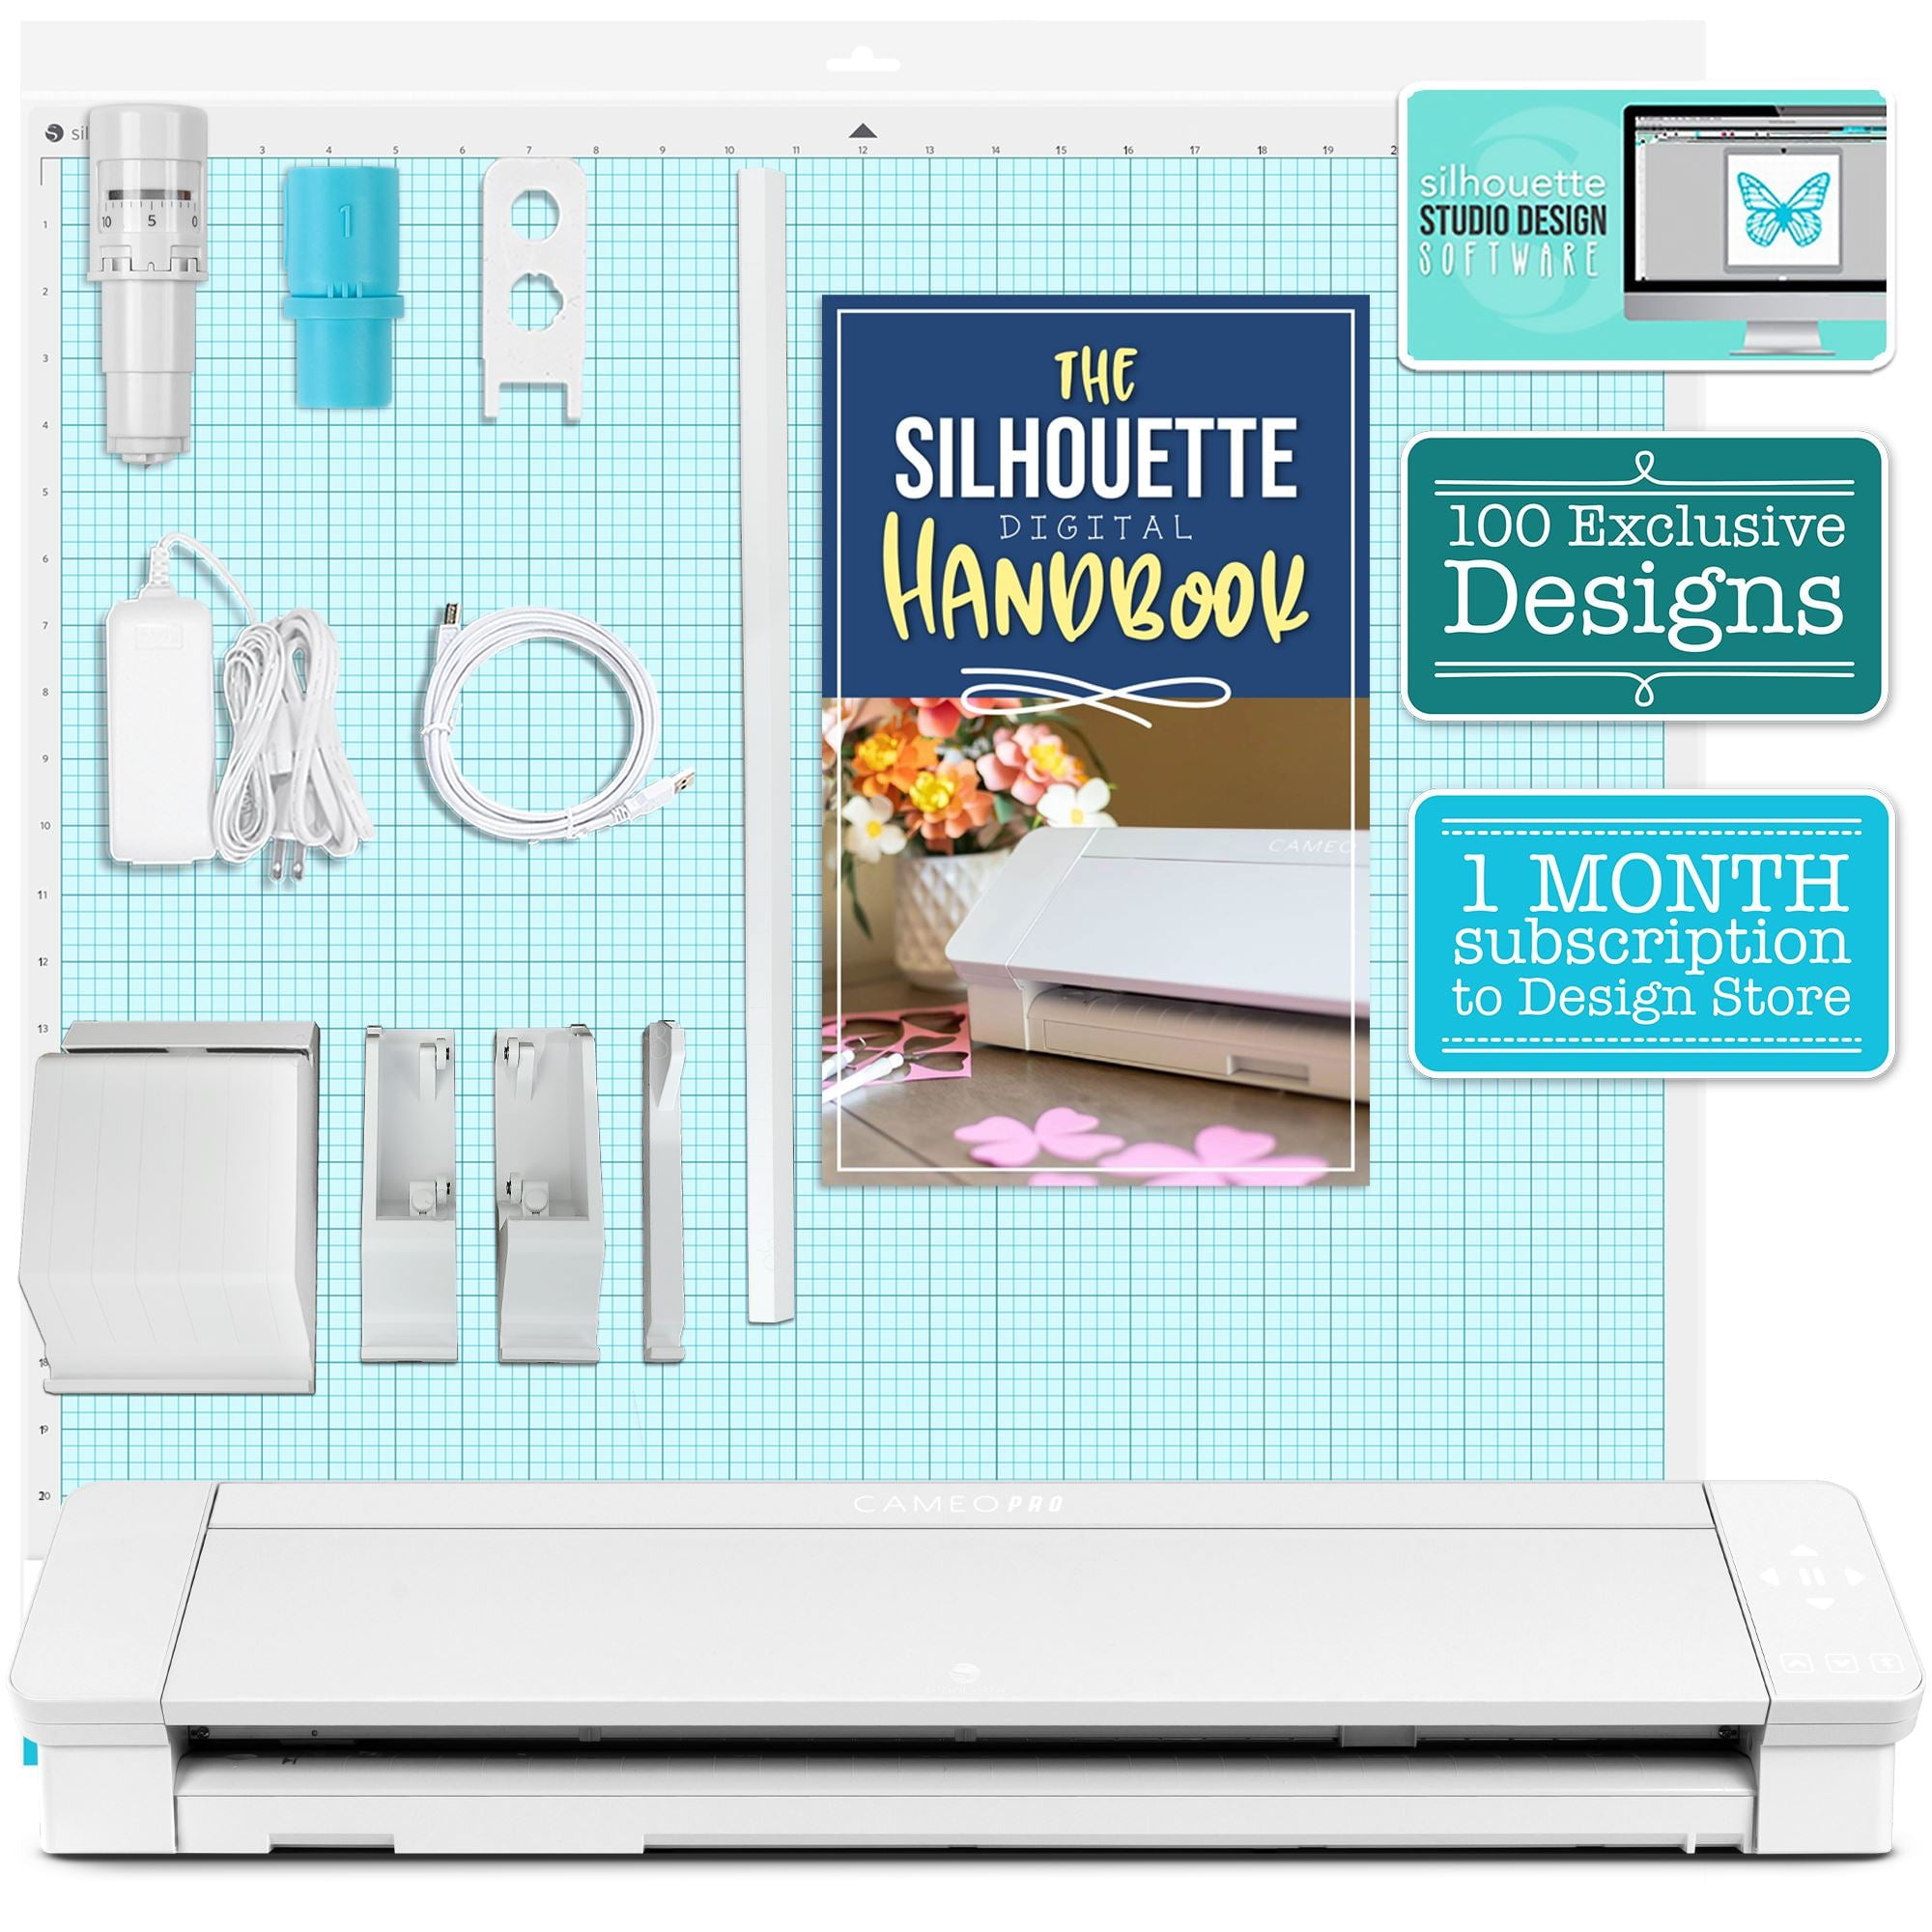 Silhouette Cameo 4 PLUS - 15 w/ Autoblade Mat Roll Feeder Electronic  Cutter for sale online